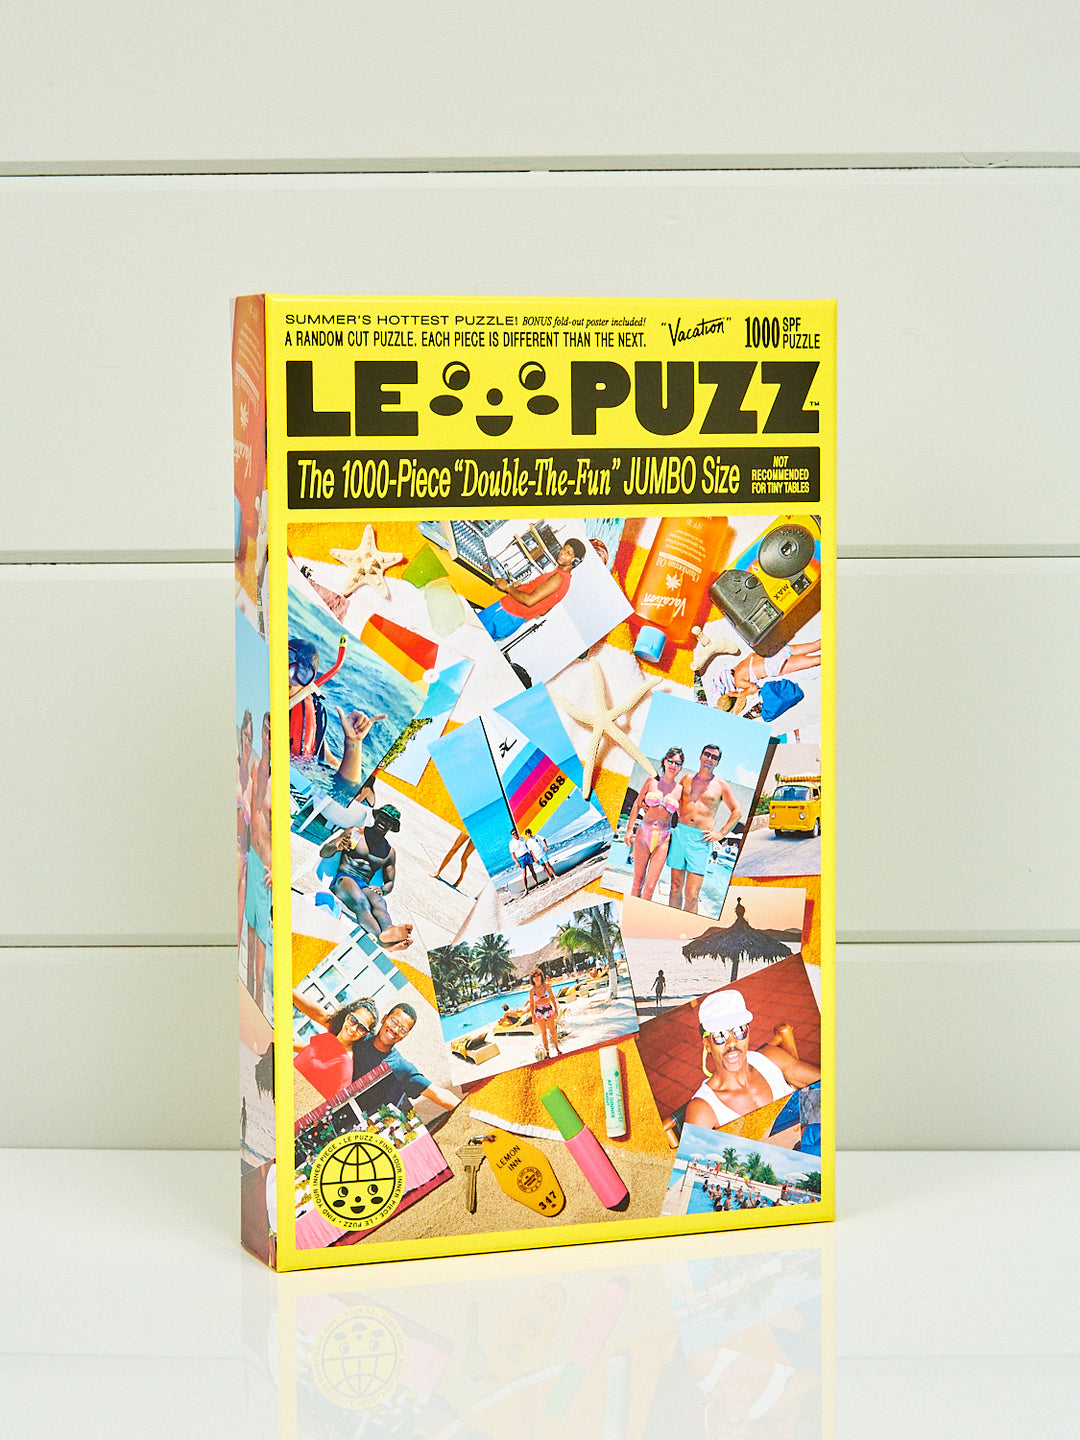 This one looks so fun!! 🧩😁 #unboxing #jigsawpuzzles #puzzling